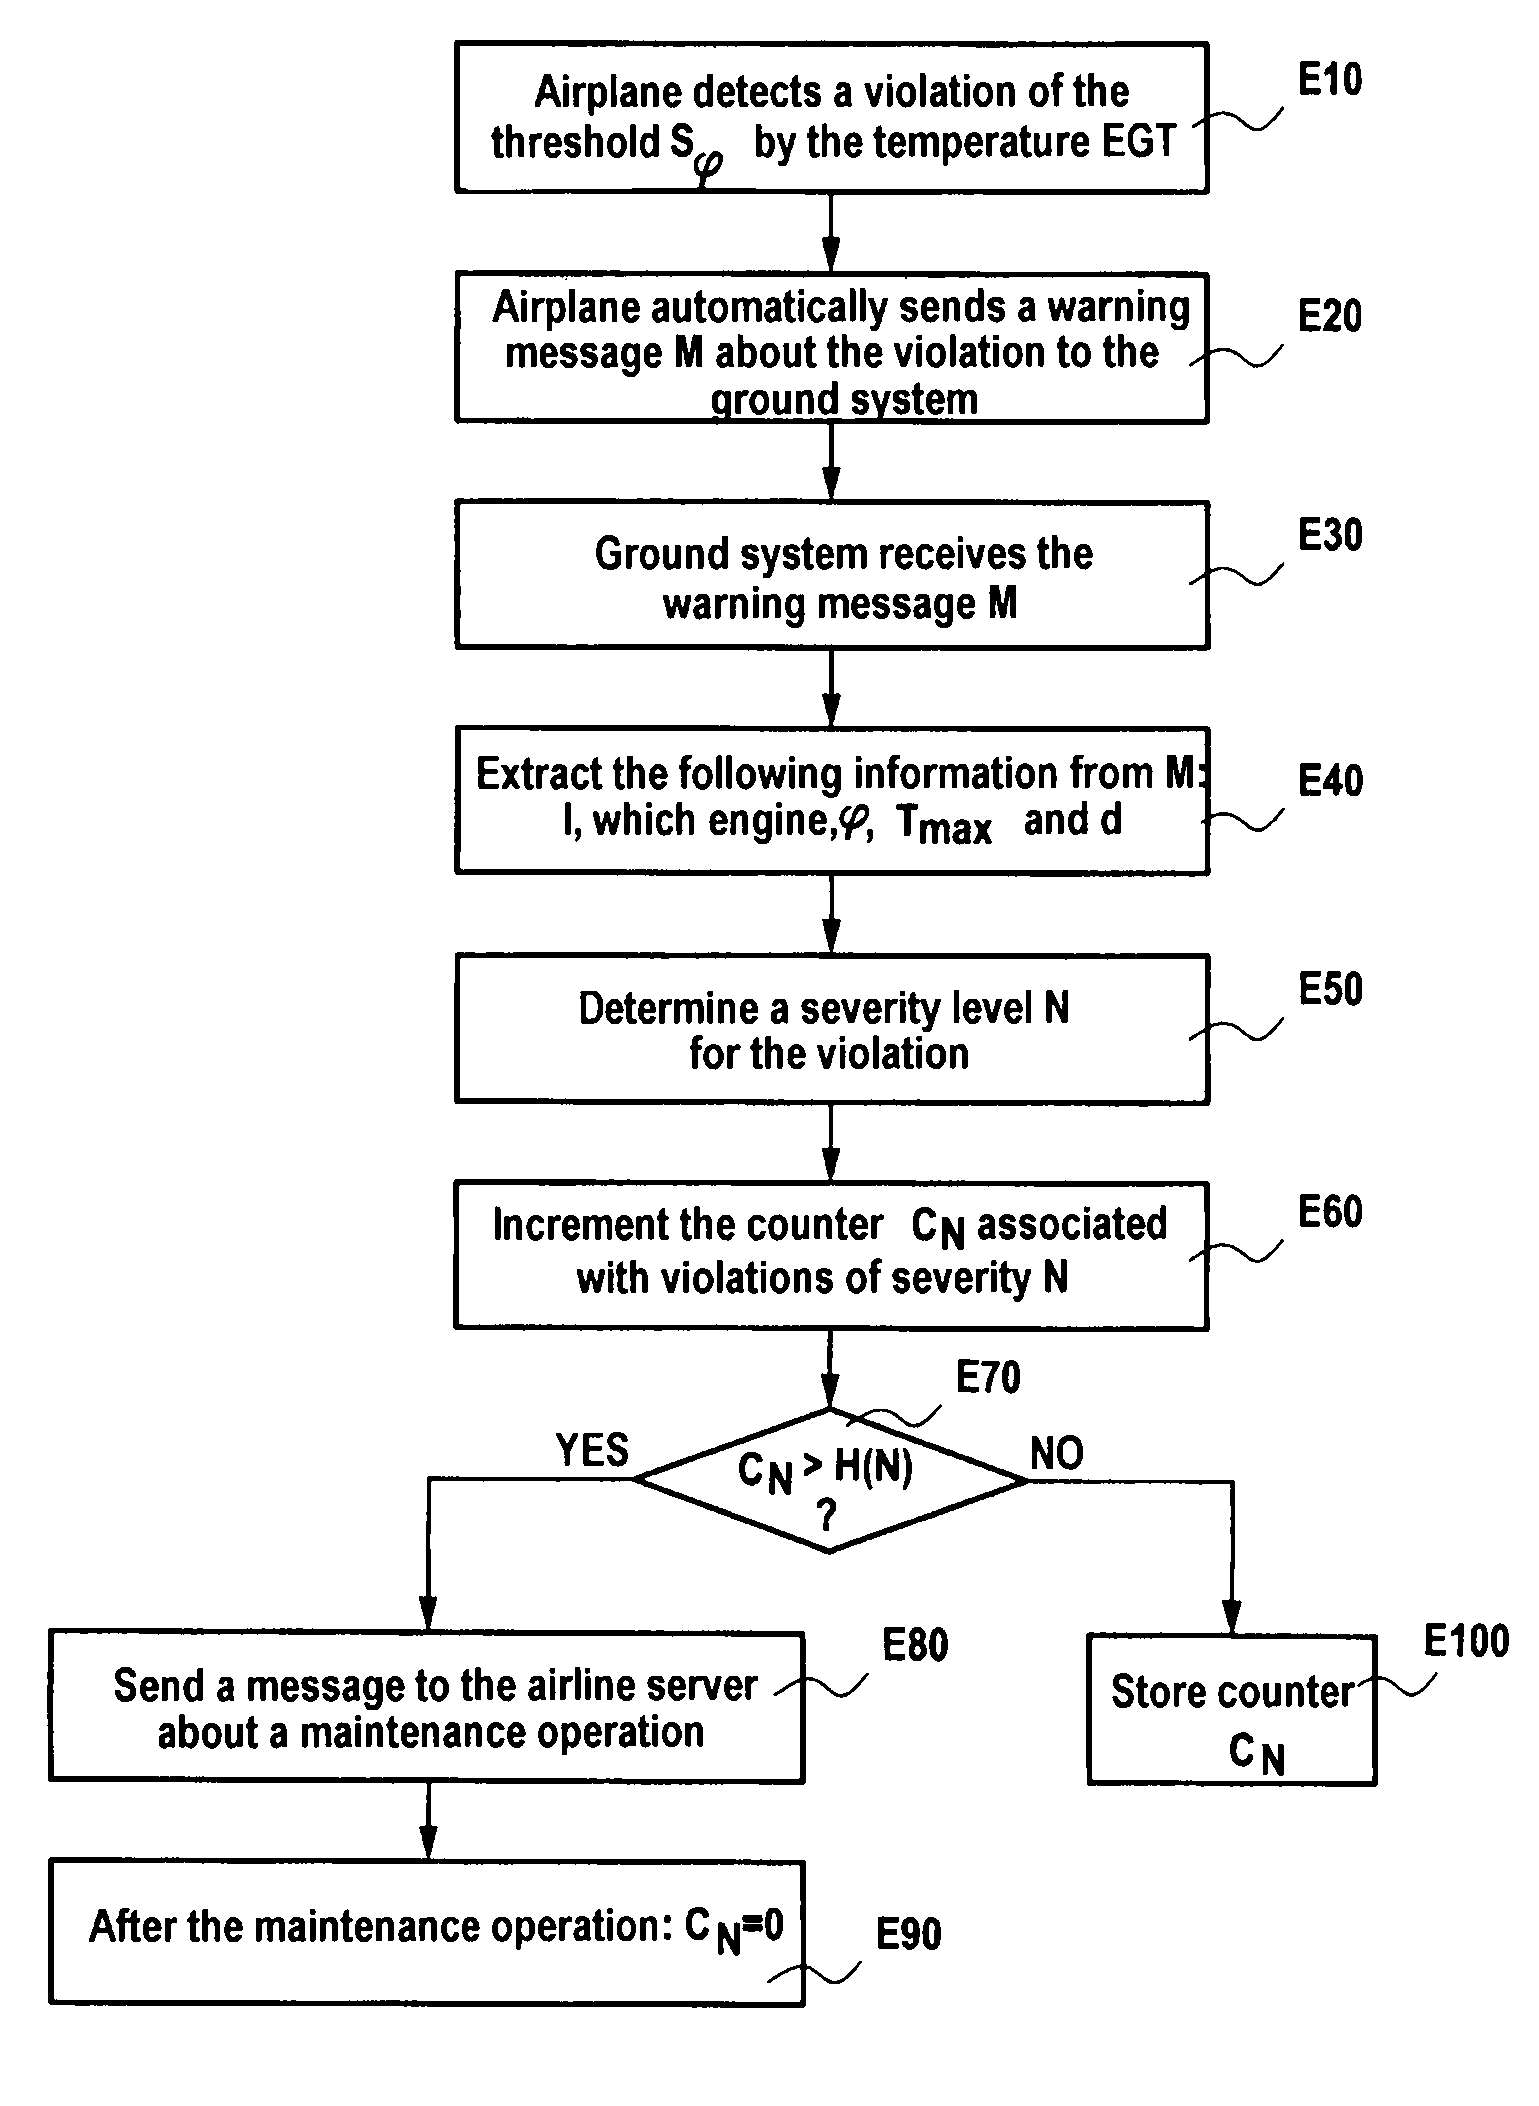 Method and a system for characterizing and counting violations of a threshold by an aircraft engine operating parameter